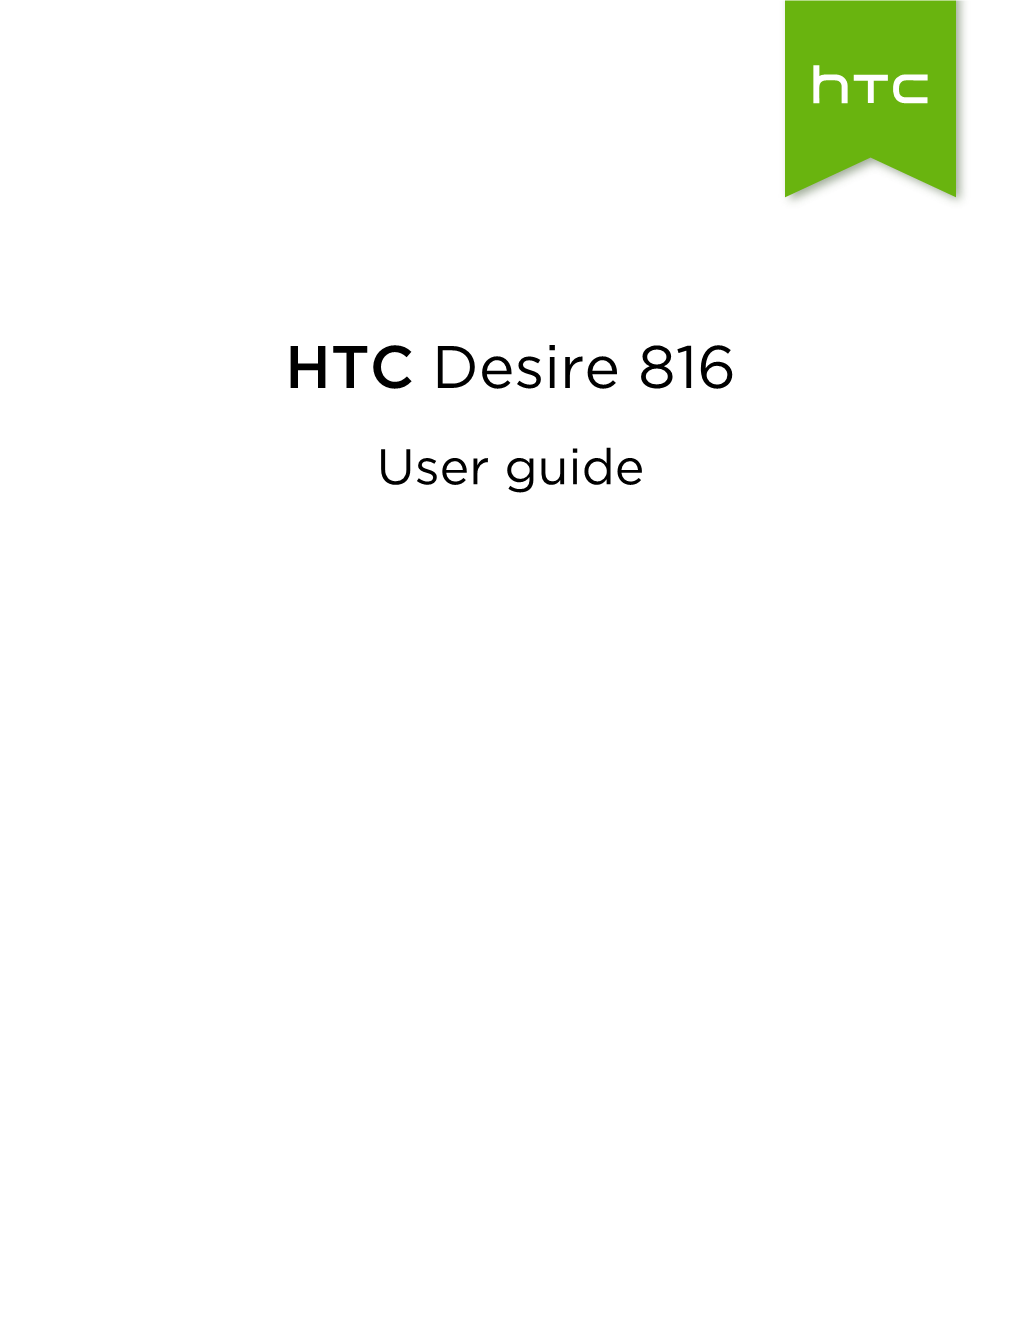 HTC Desire 816 User Guide 2 Contents Contents